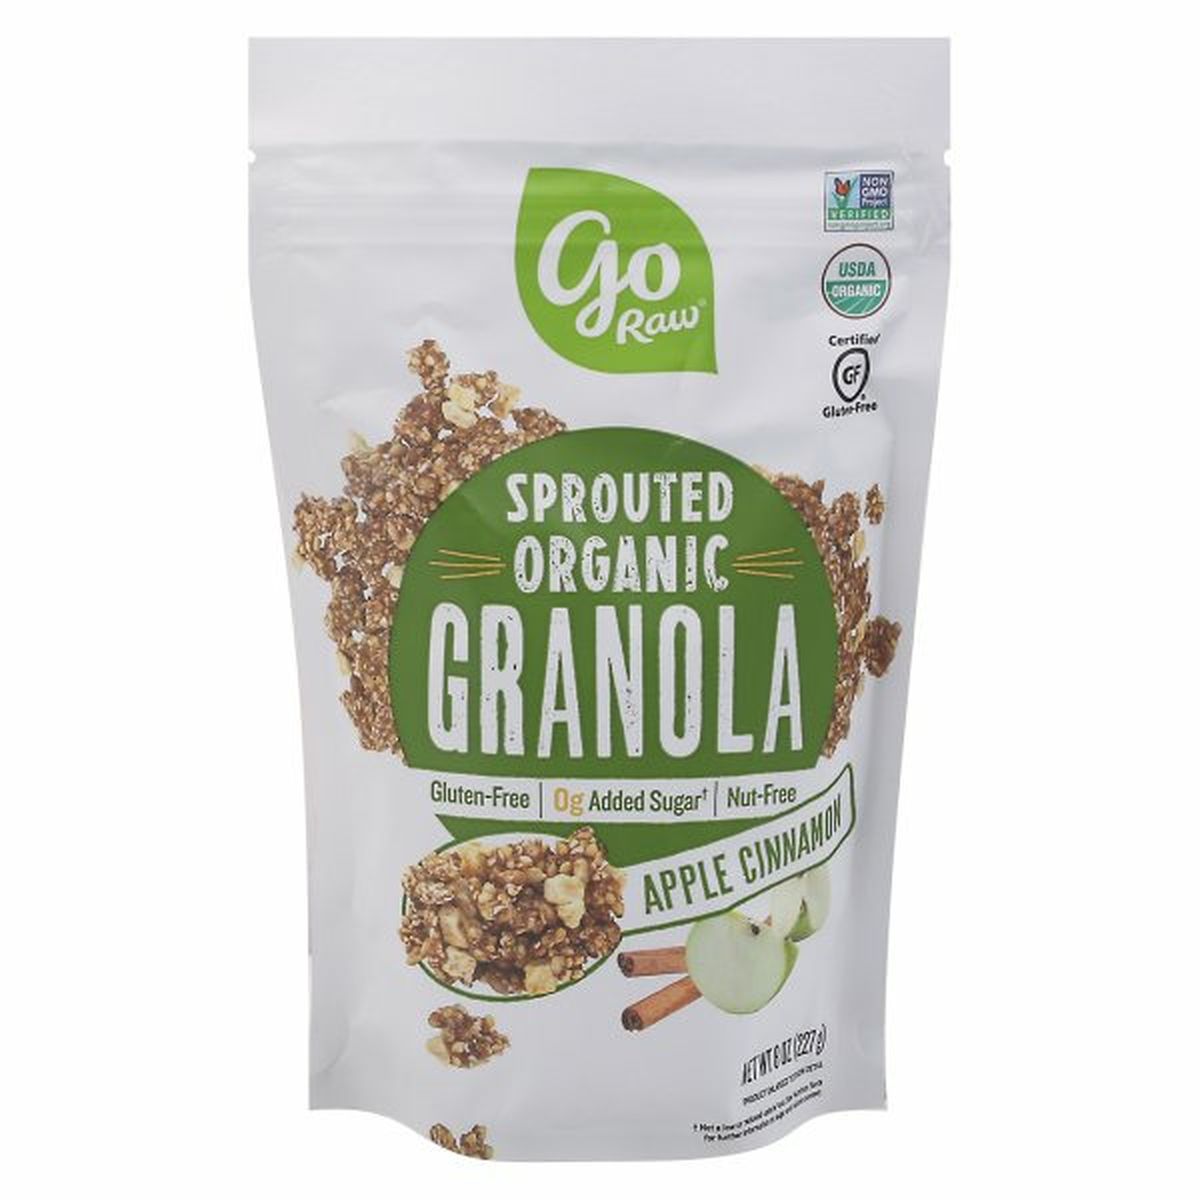 Calories in Go Raw Granola, Organic, Apple Cinnamon, Sprouted